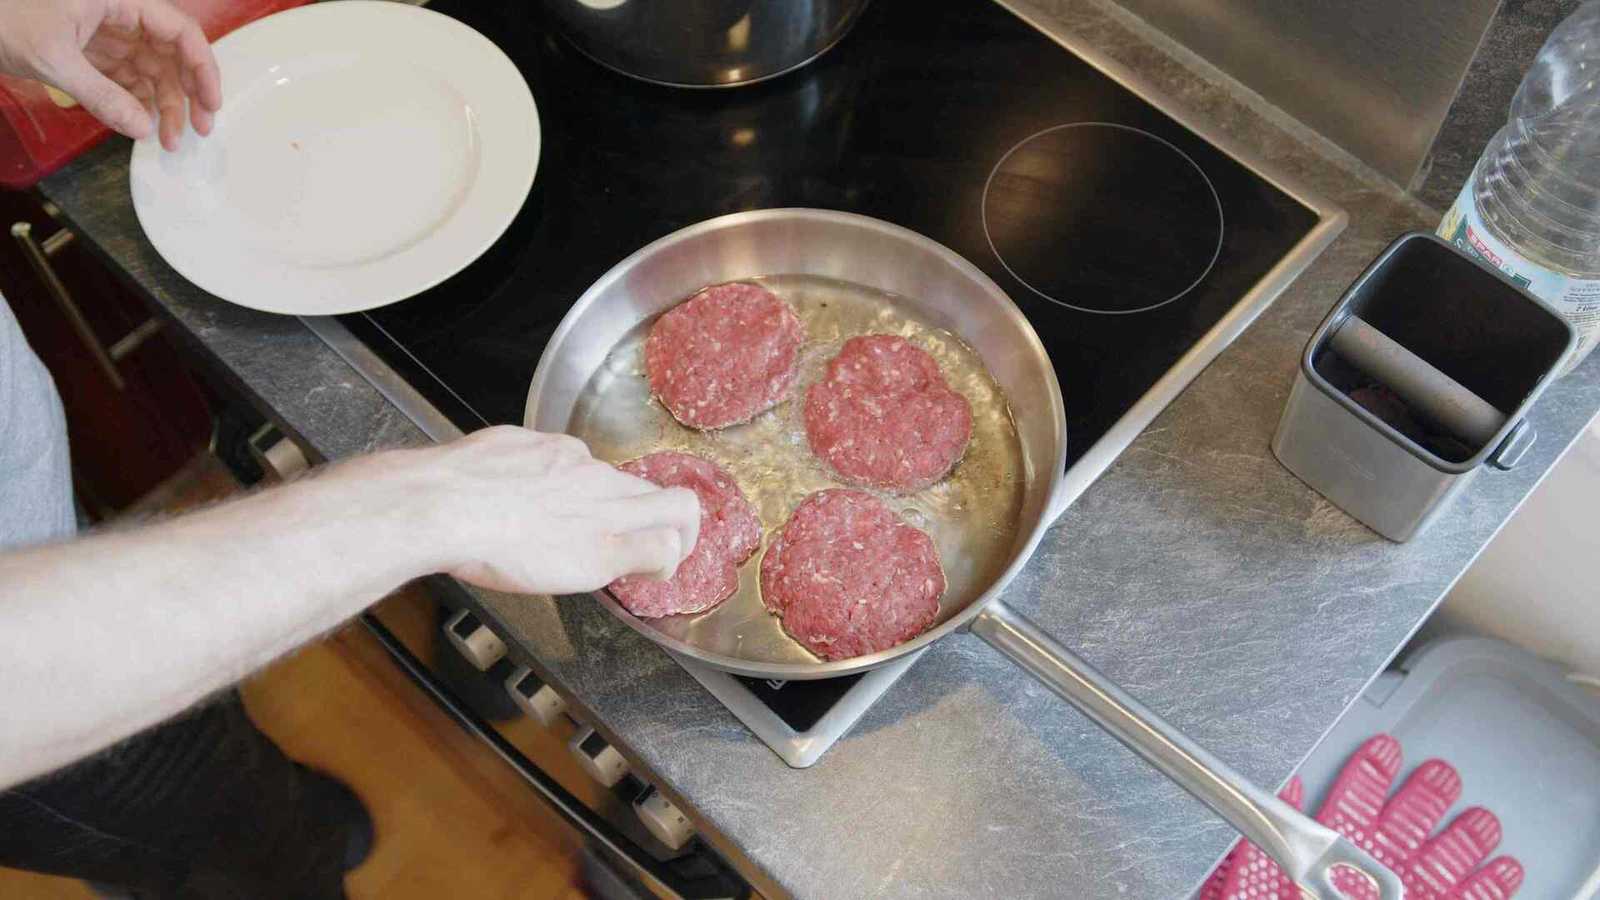 Raw patties in a pan being cooked